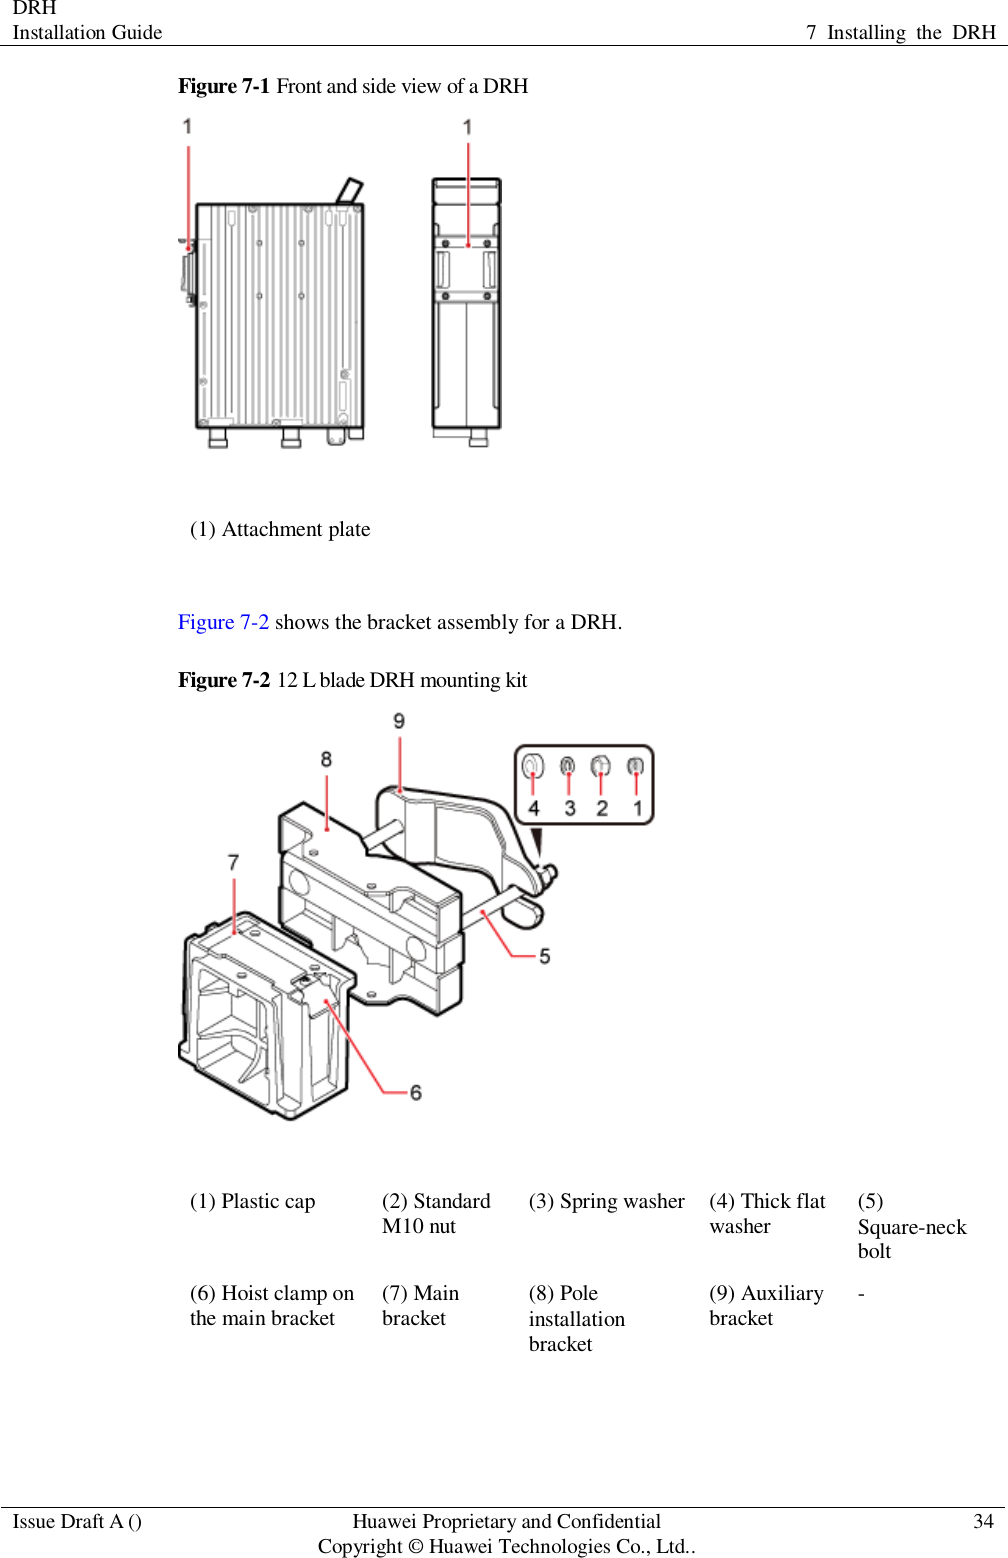 DRH   Installation Guide 7  Installing  the  DRH  Issue Draft A () Huawei Proprietary and Confidential                                     Copyright © Huawei Technologies Co., Ltd.. 34  Figure 7-1 Front and side view of a DRH  (1) Attachment plate  Figure 7-2 shows the bracket assembly for a DRH. Figure 7-2 12 L blade DRH mounting kit  (1) Plastic cap (2) Standard M10 nut (3) Spring washer (4) Thick flat washer (5) Square-neck bolt (6) Hoist clamp on the main bracket (7) Main bracket (8) Pole installation bracket (9) Auxiliary bracket -  